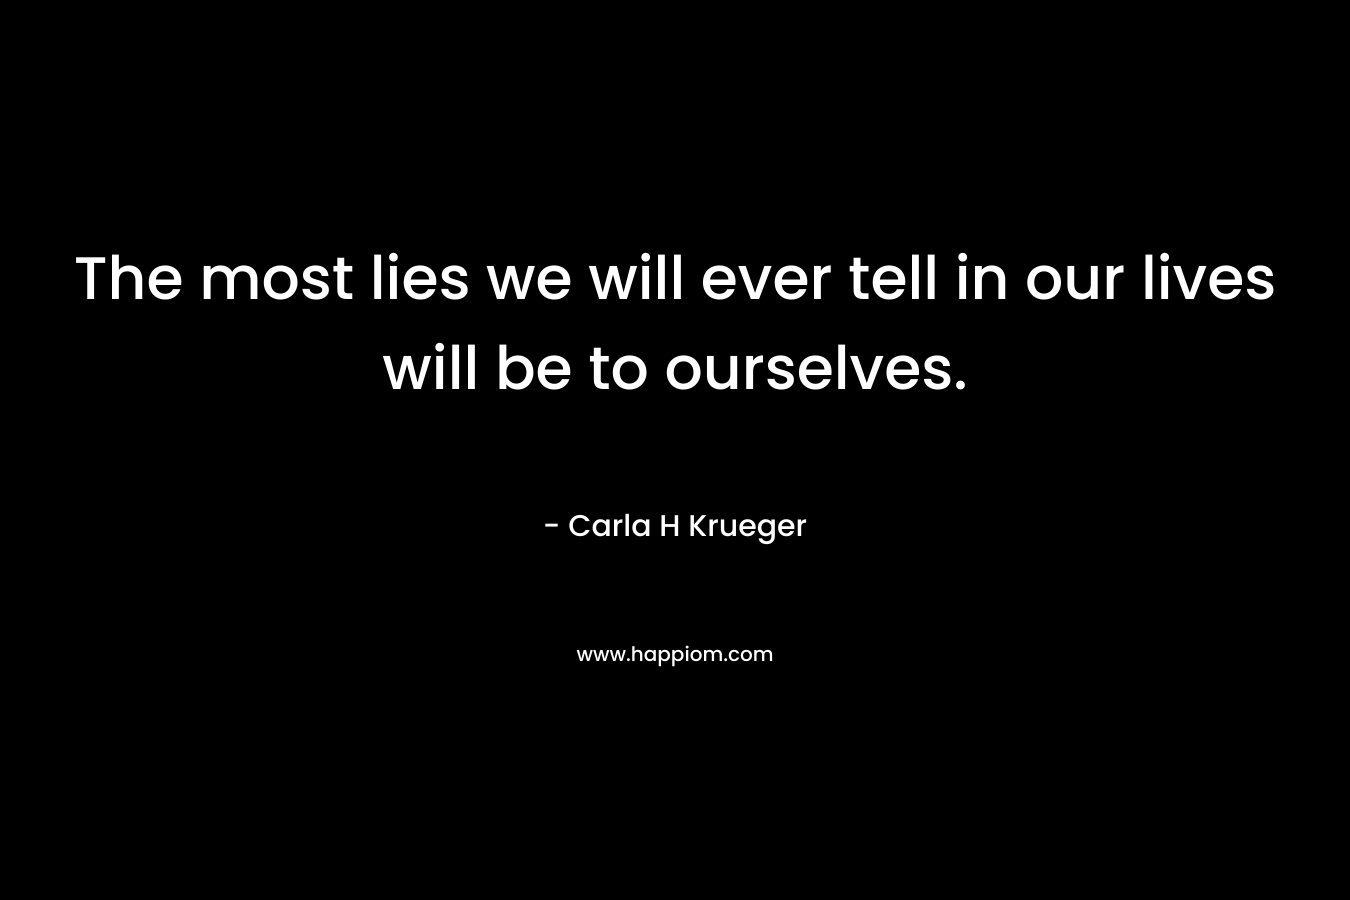 The most lies we will ever tell in our lives will be to ourselves.